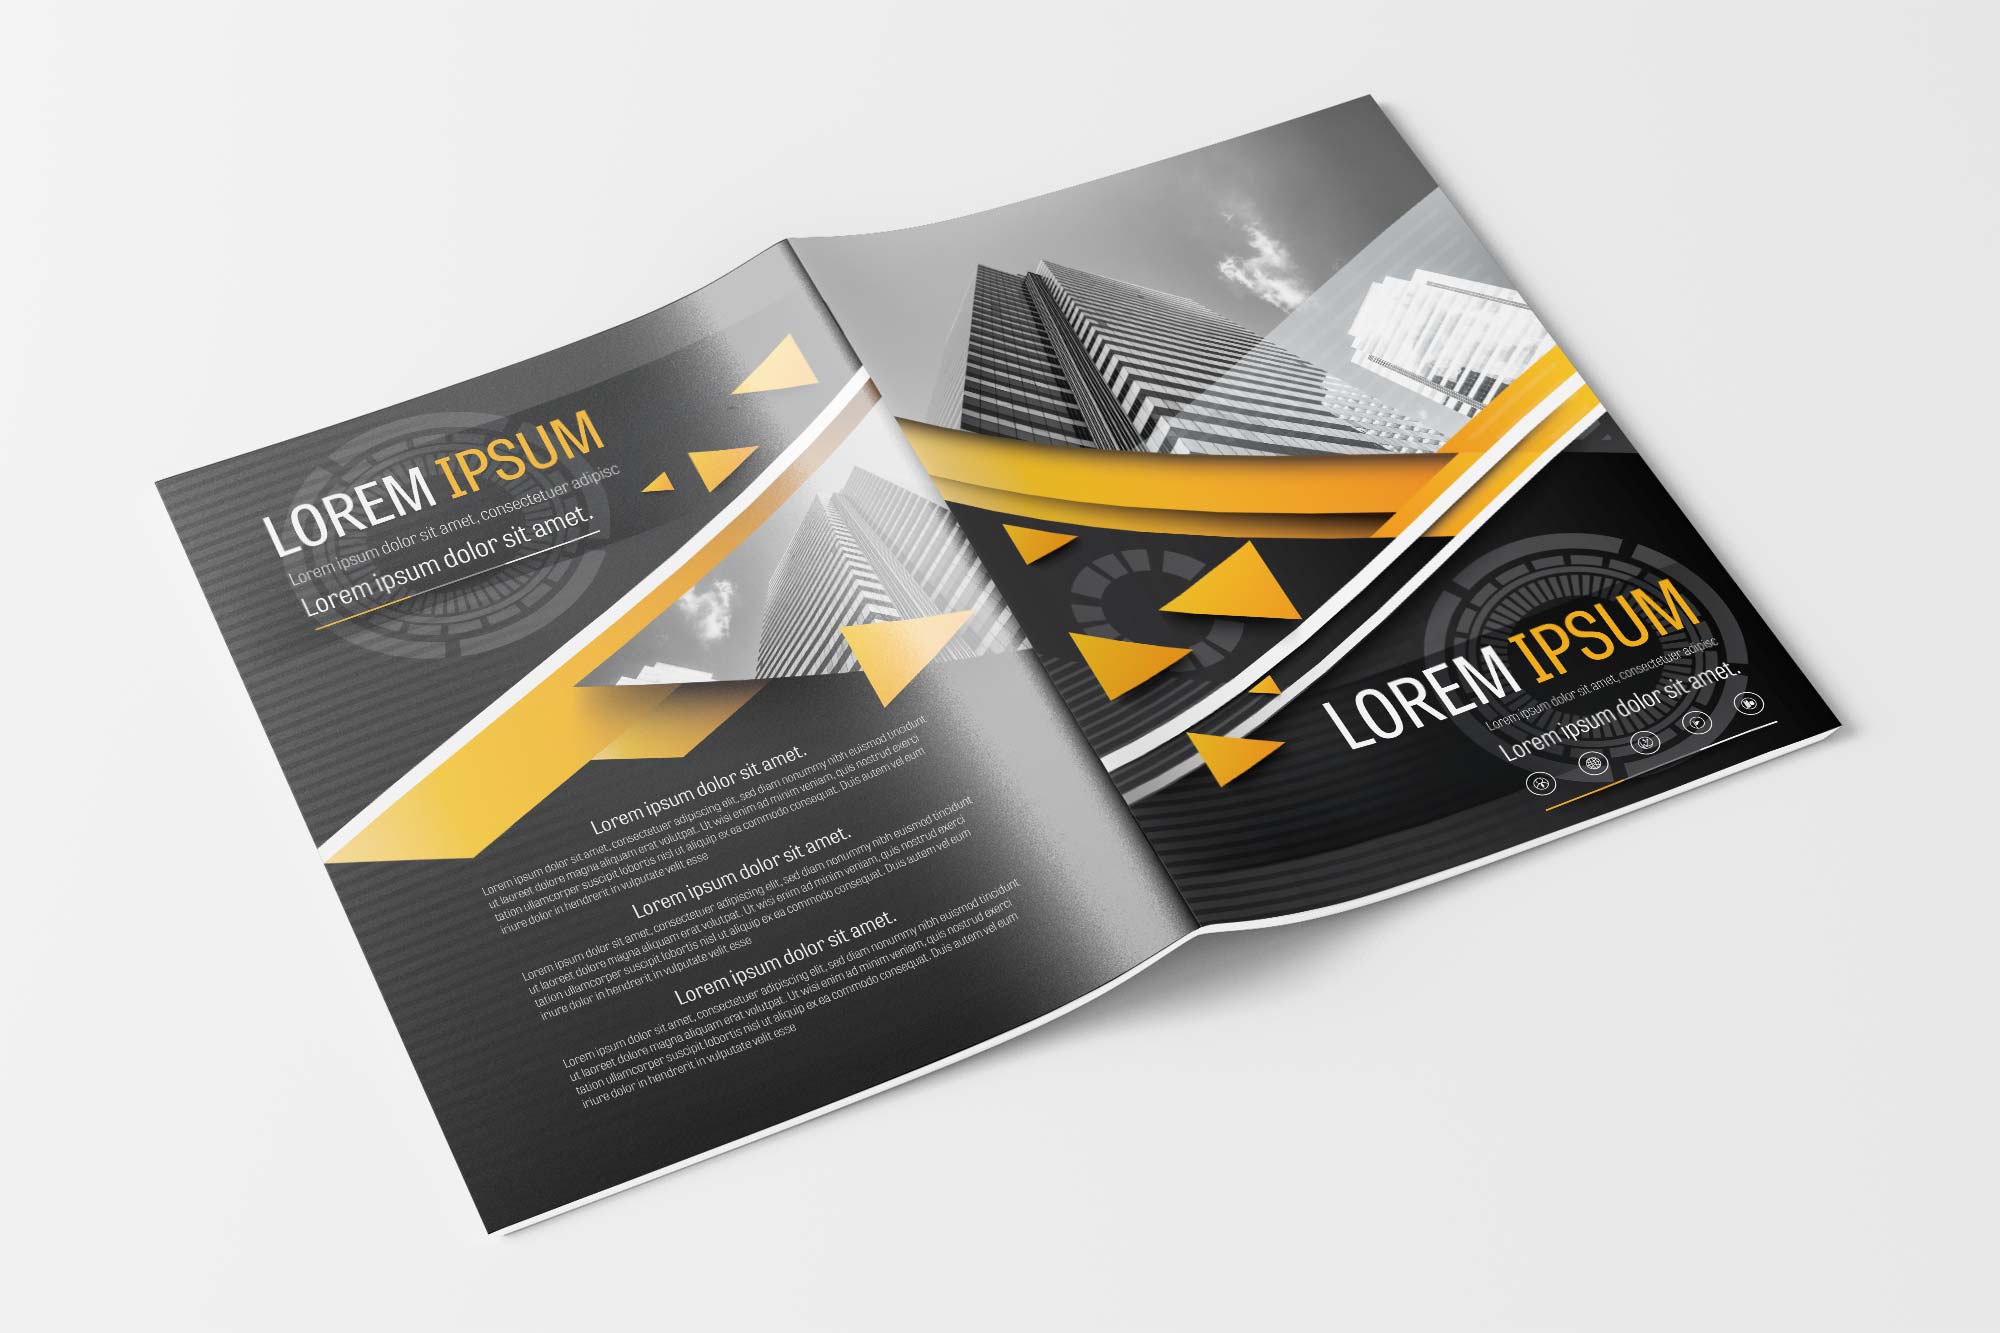 A4 Gray and Yellow Modern Triangle Design Element Brochure Template